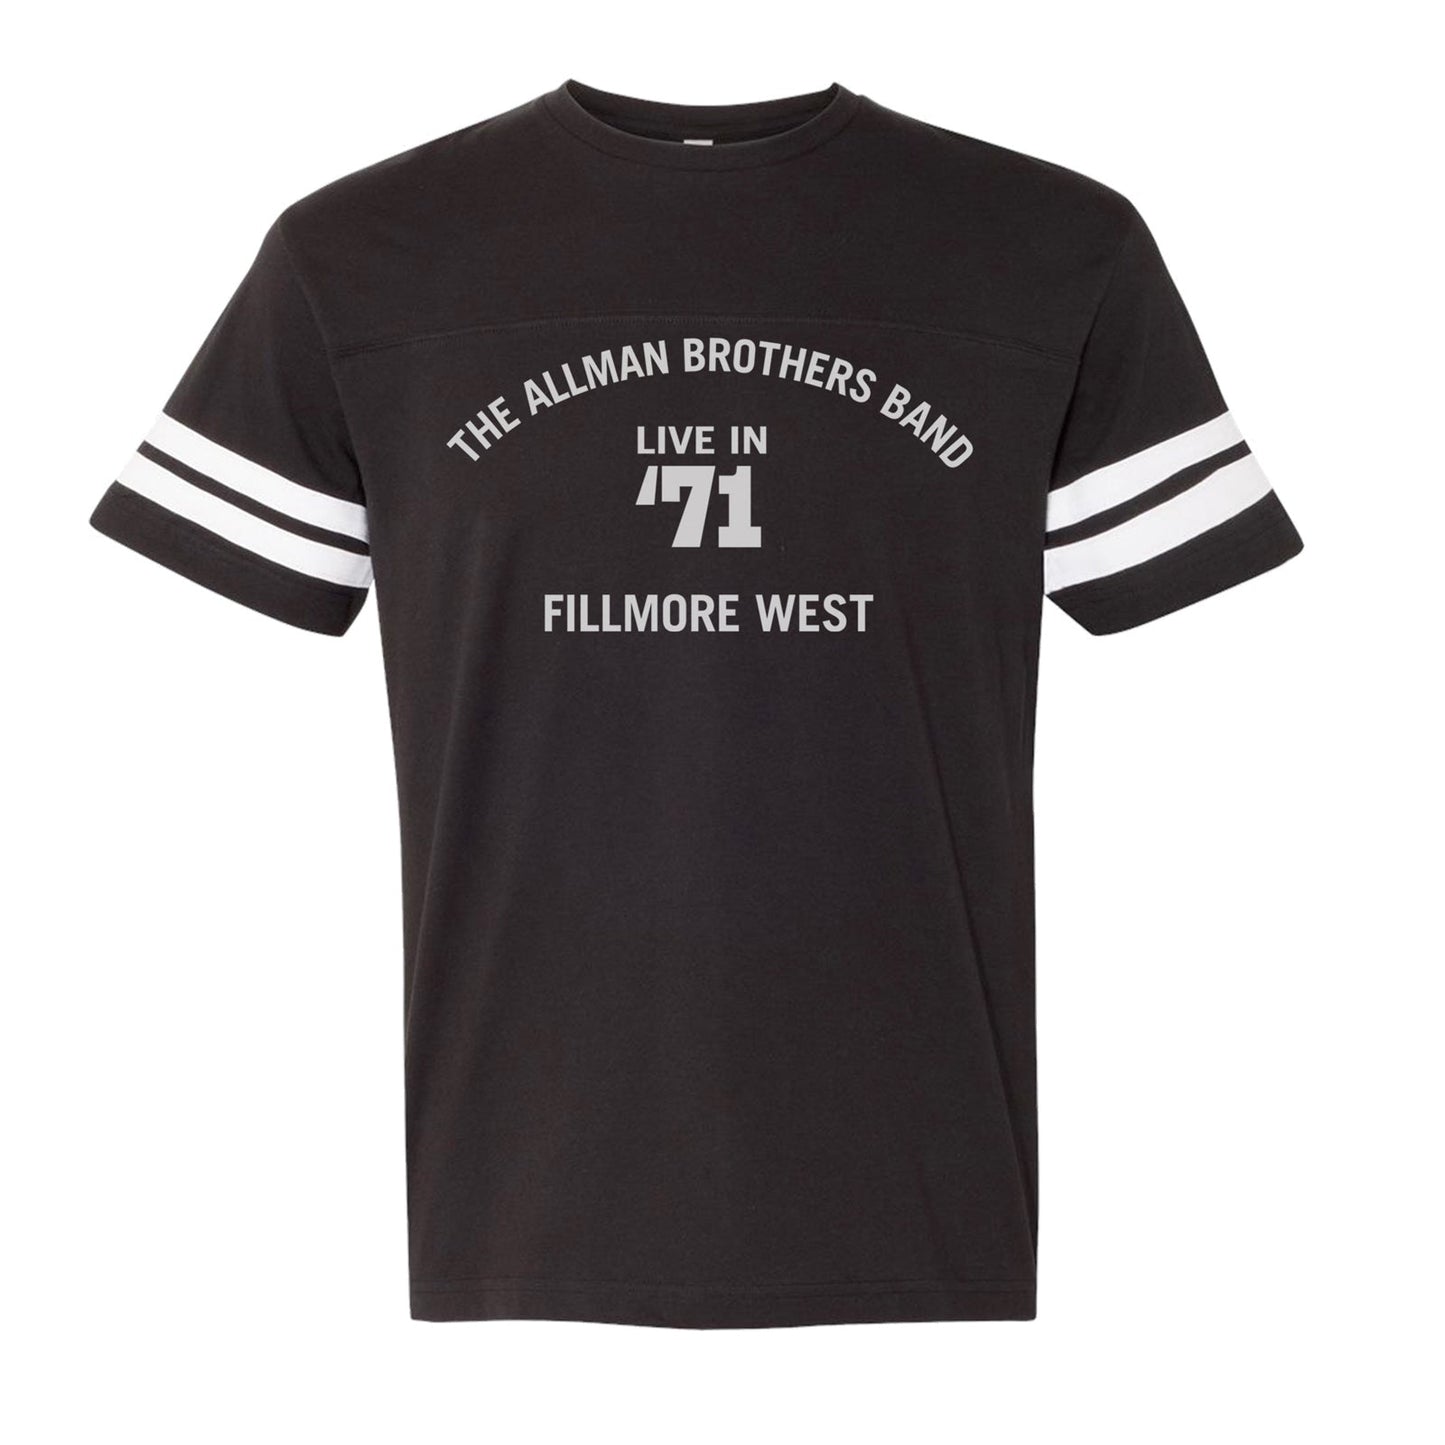 The Allman Brothers Band Fillmore West Tee